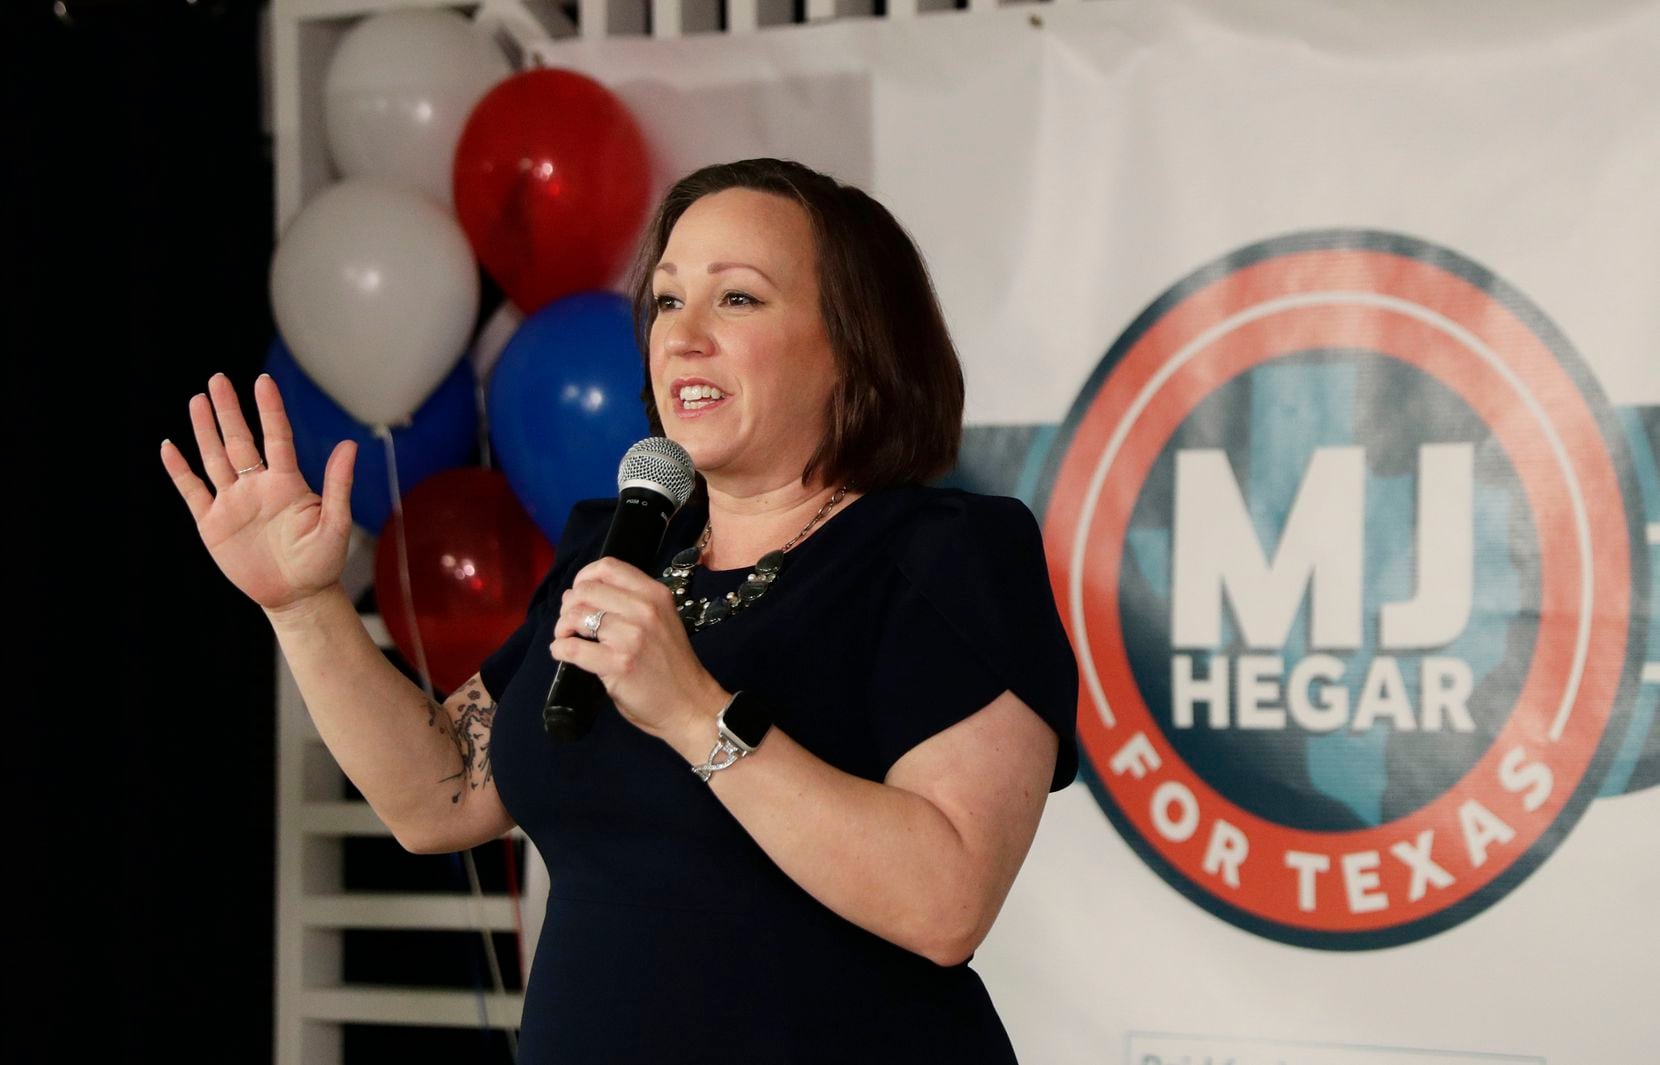 Democratic U.S. Senate candidate MJ Hegar has used the issue of the courts to criticize Texas Sen. John Cornyn, a Republican, as overly partisan. (AP Photo/Eric Gay)